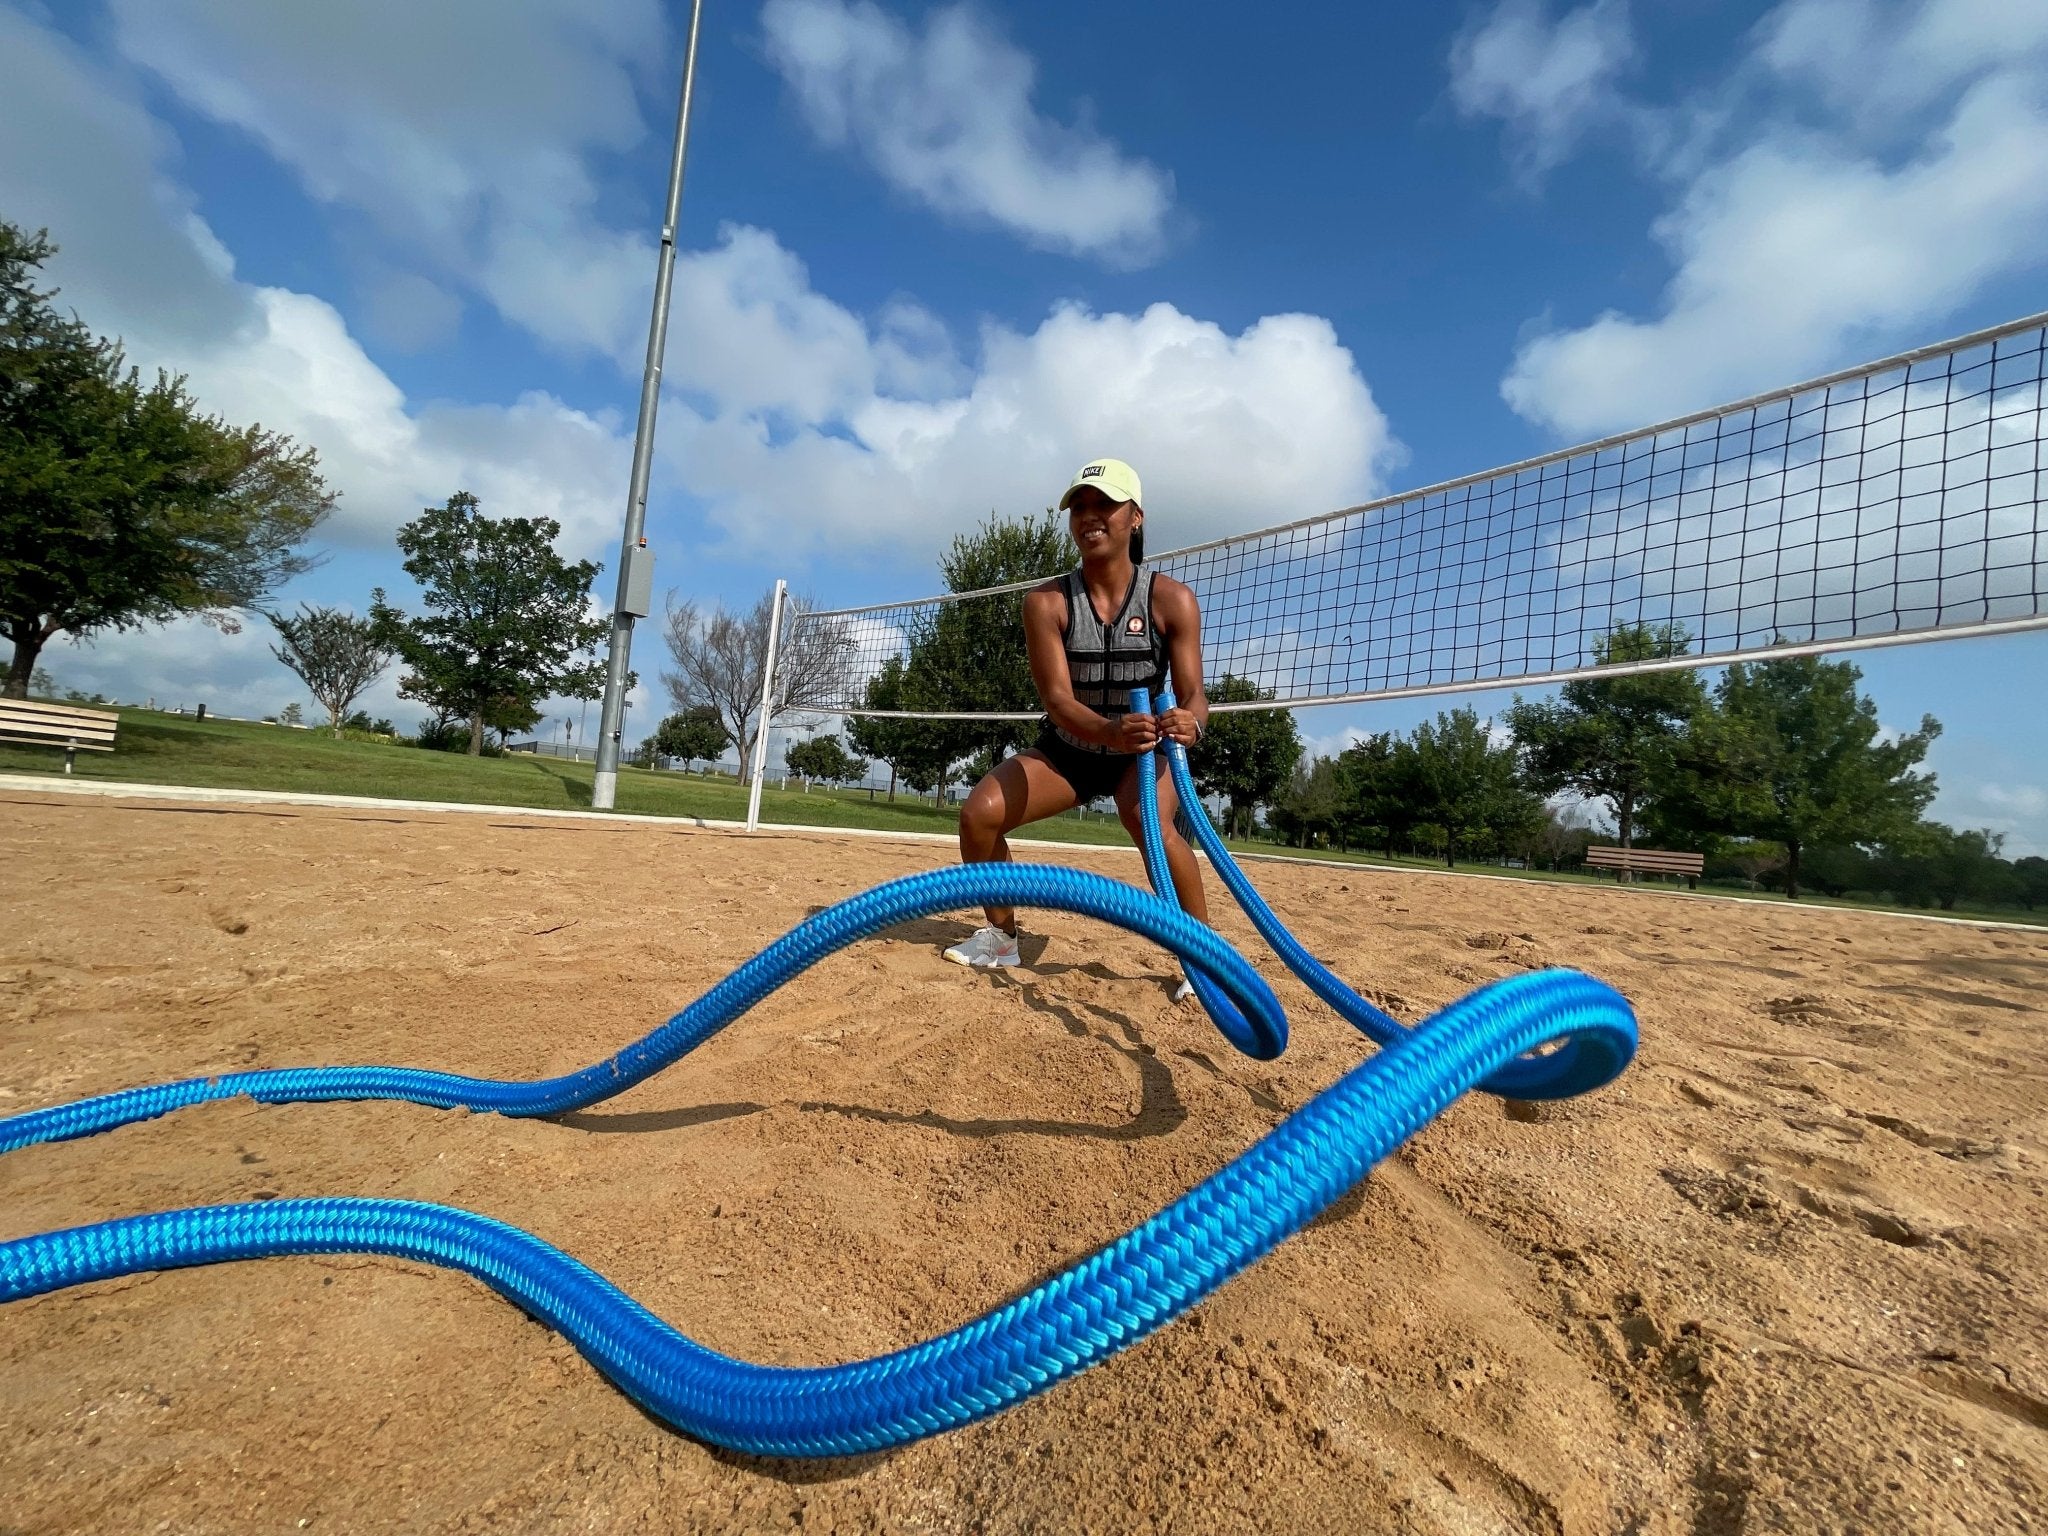 Battle Ropes Exercises for Weight Loss and Cardio - Hyperwear